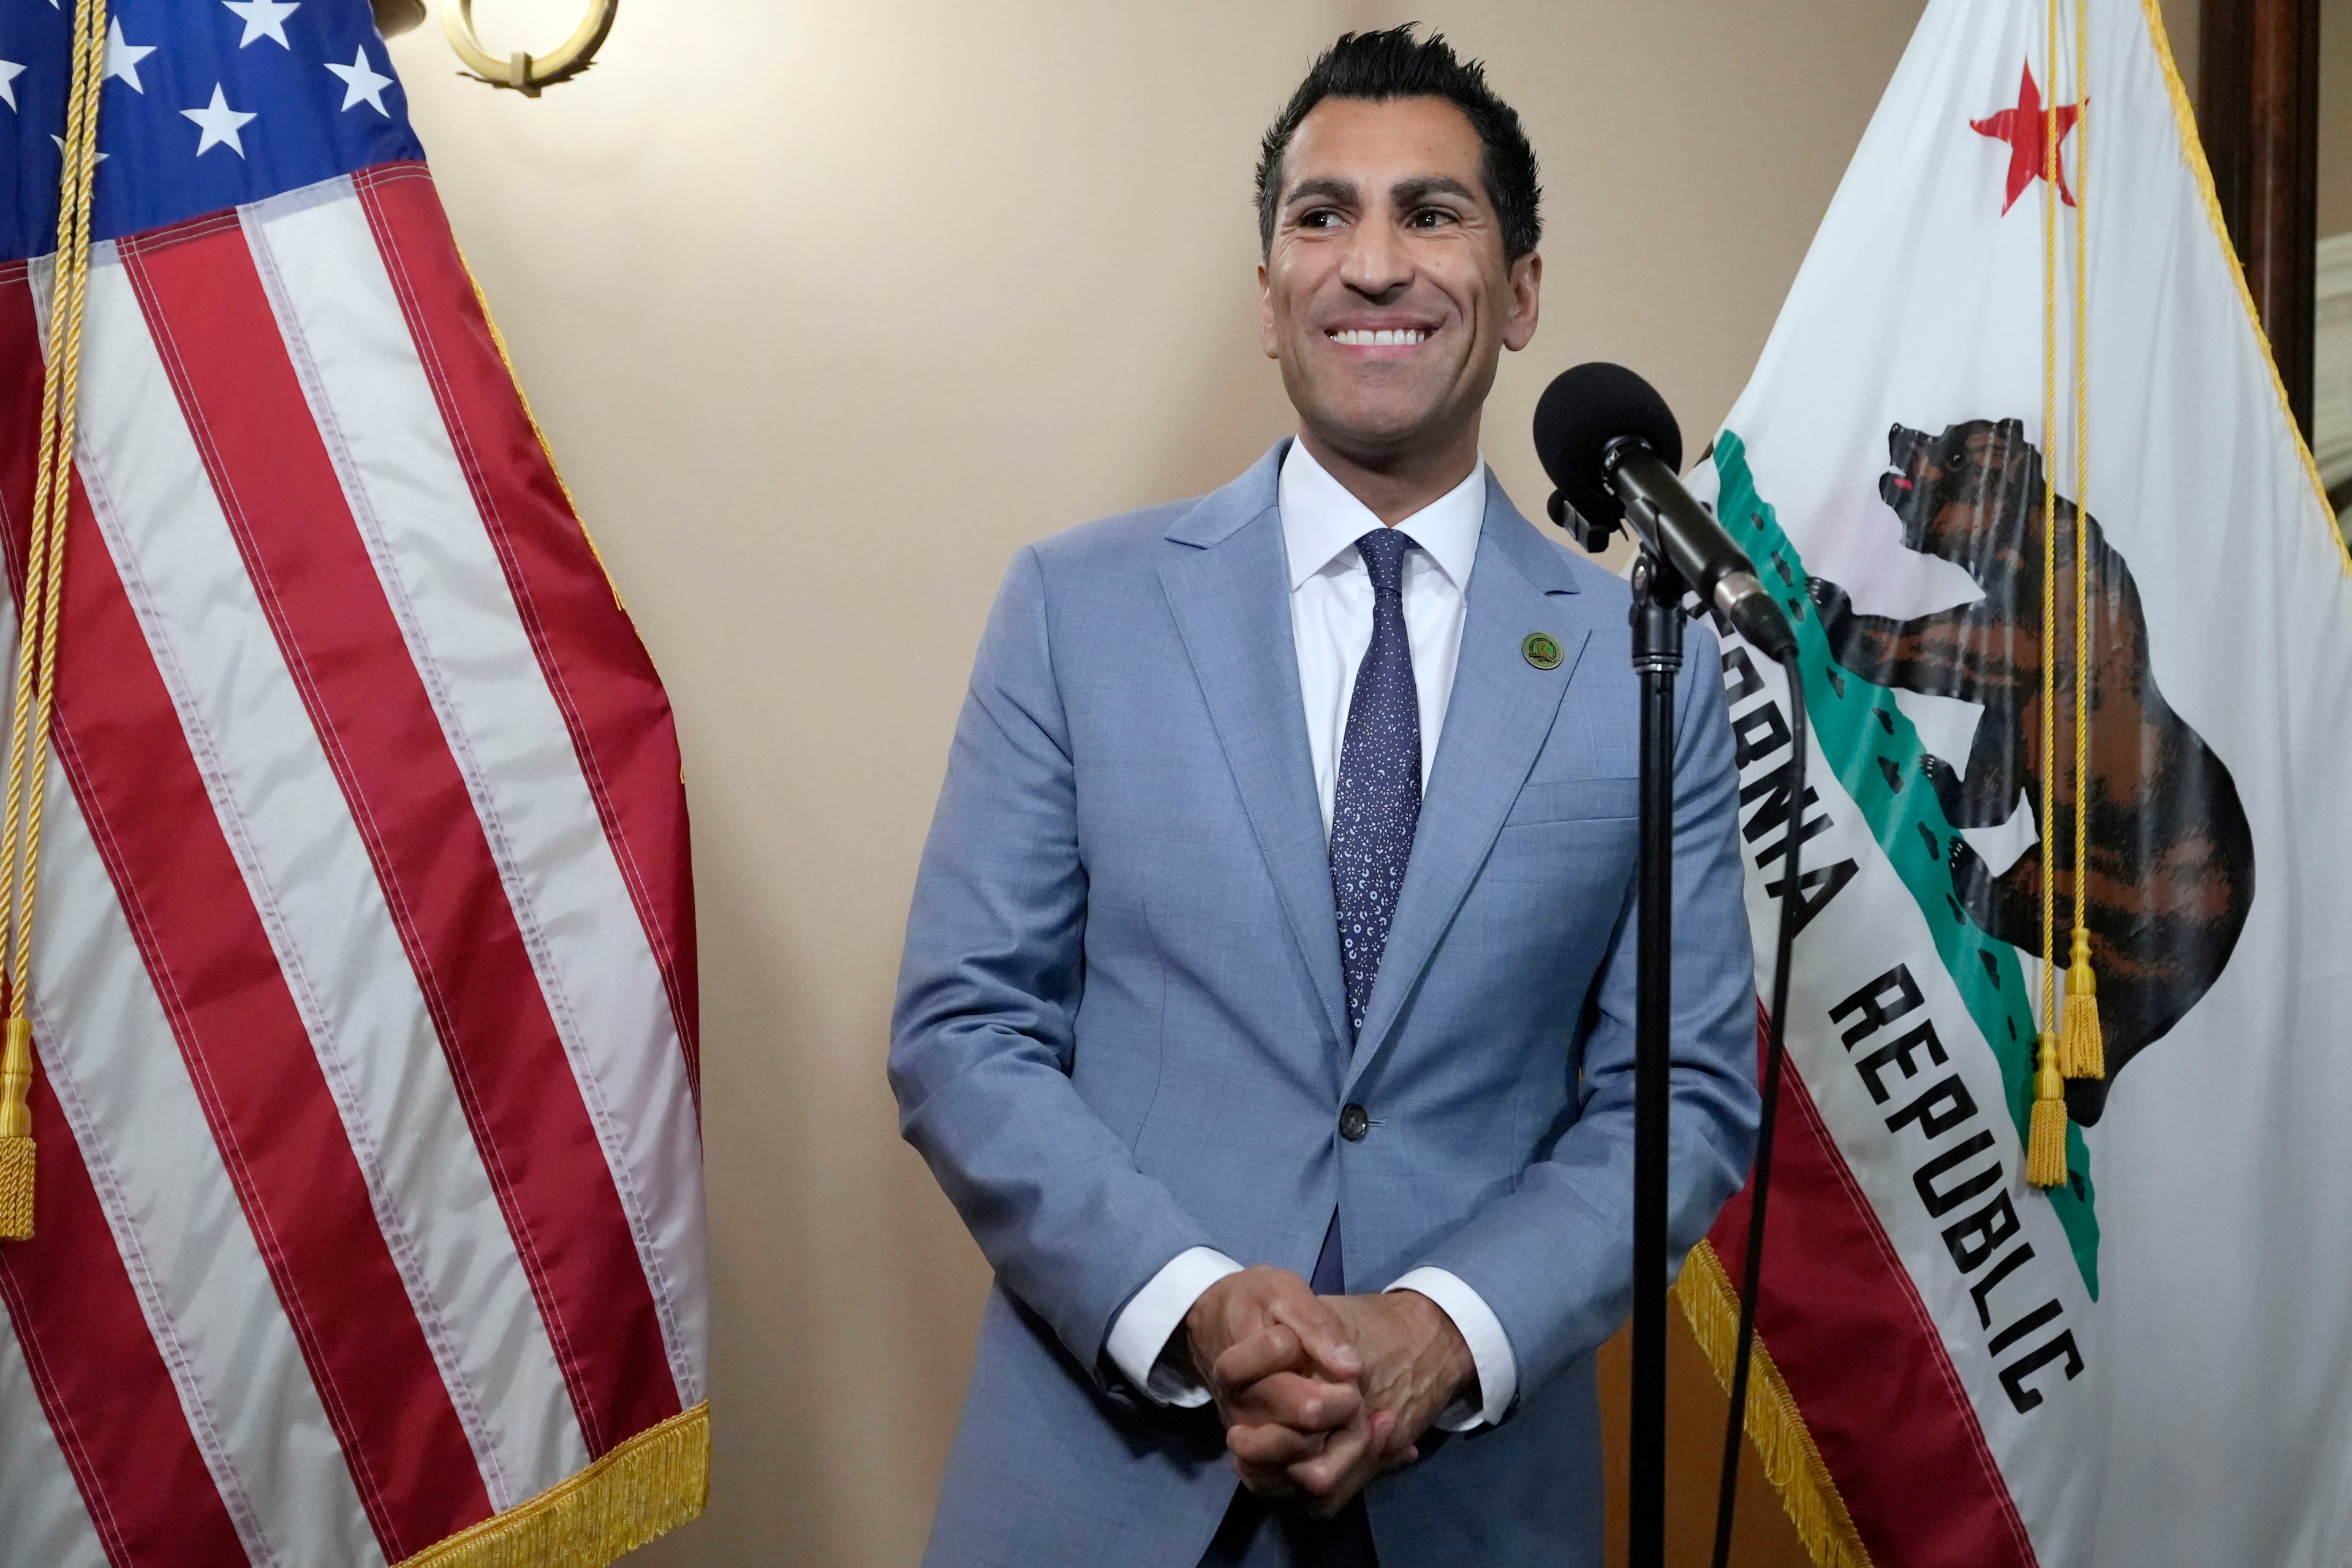 New California Assembly Speaker Wants To Unify the Democrats